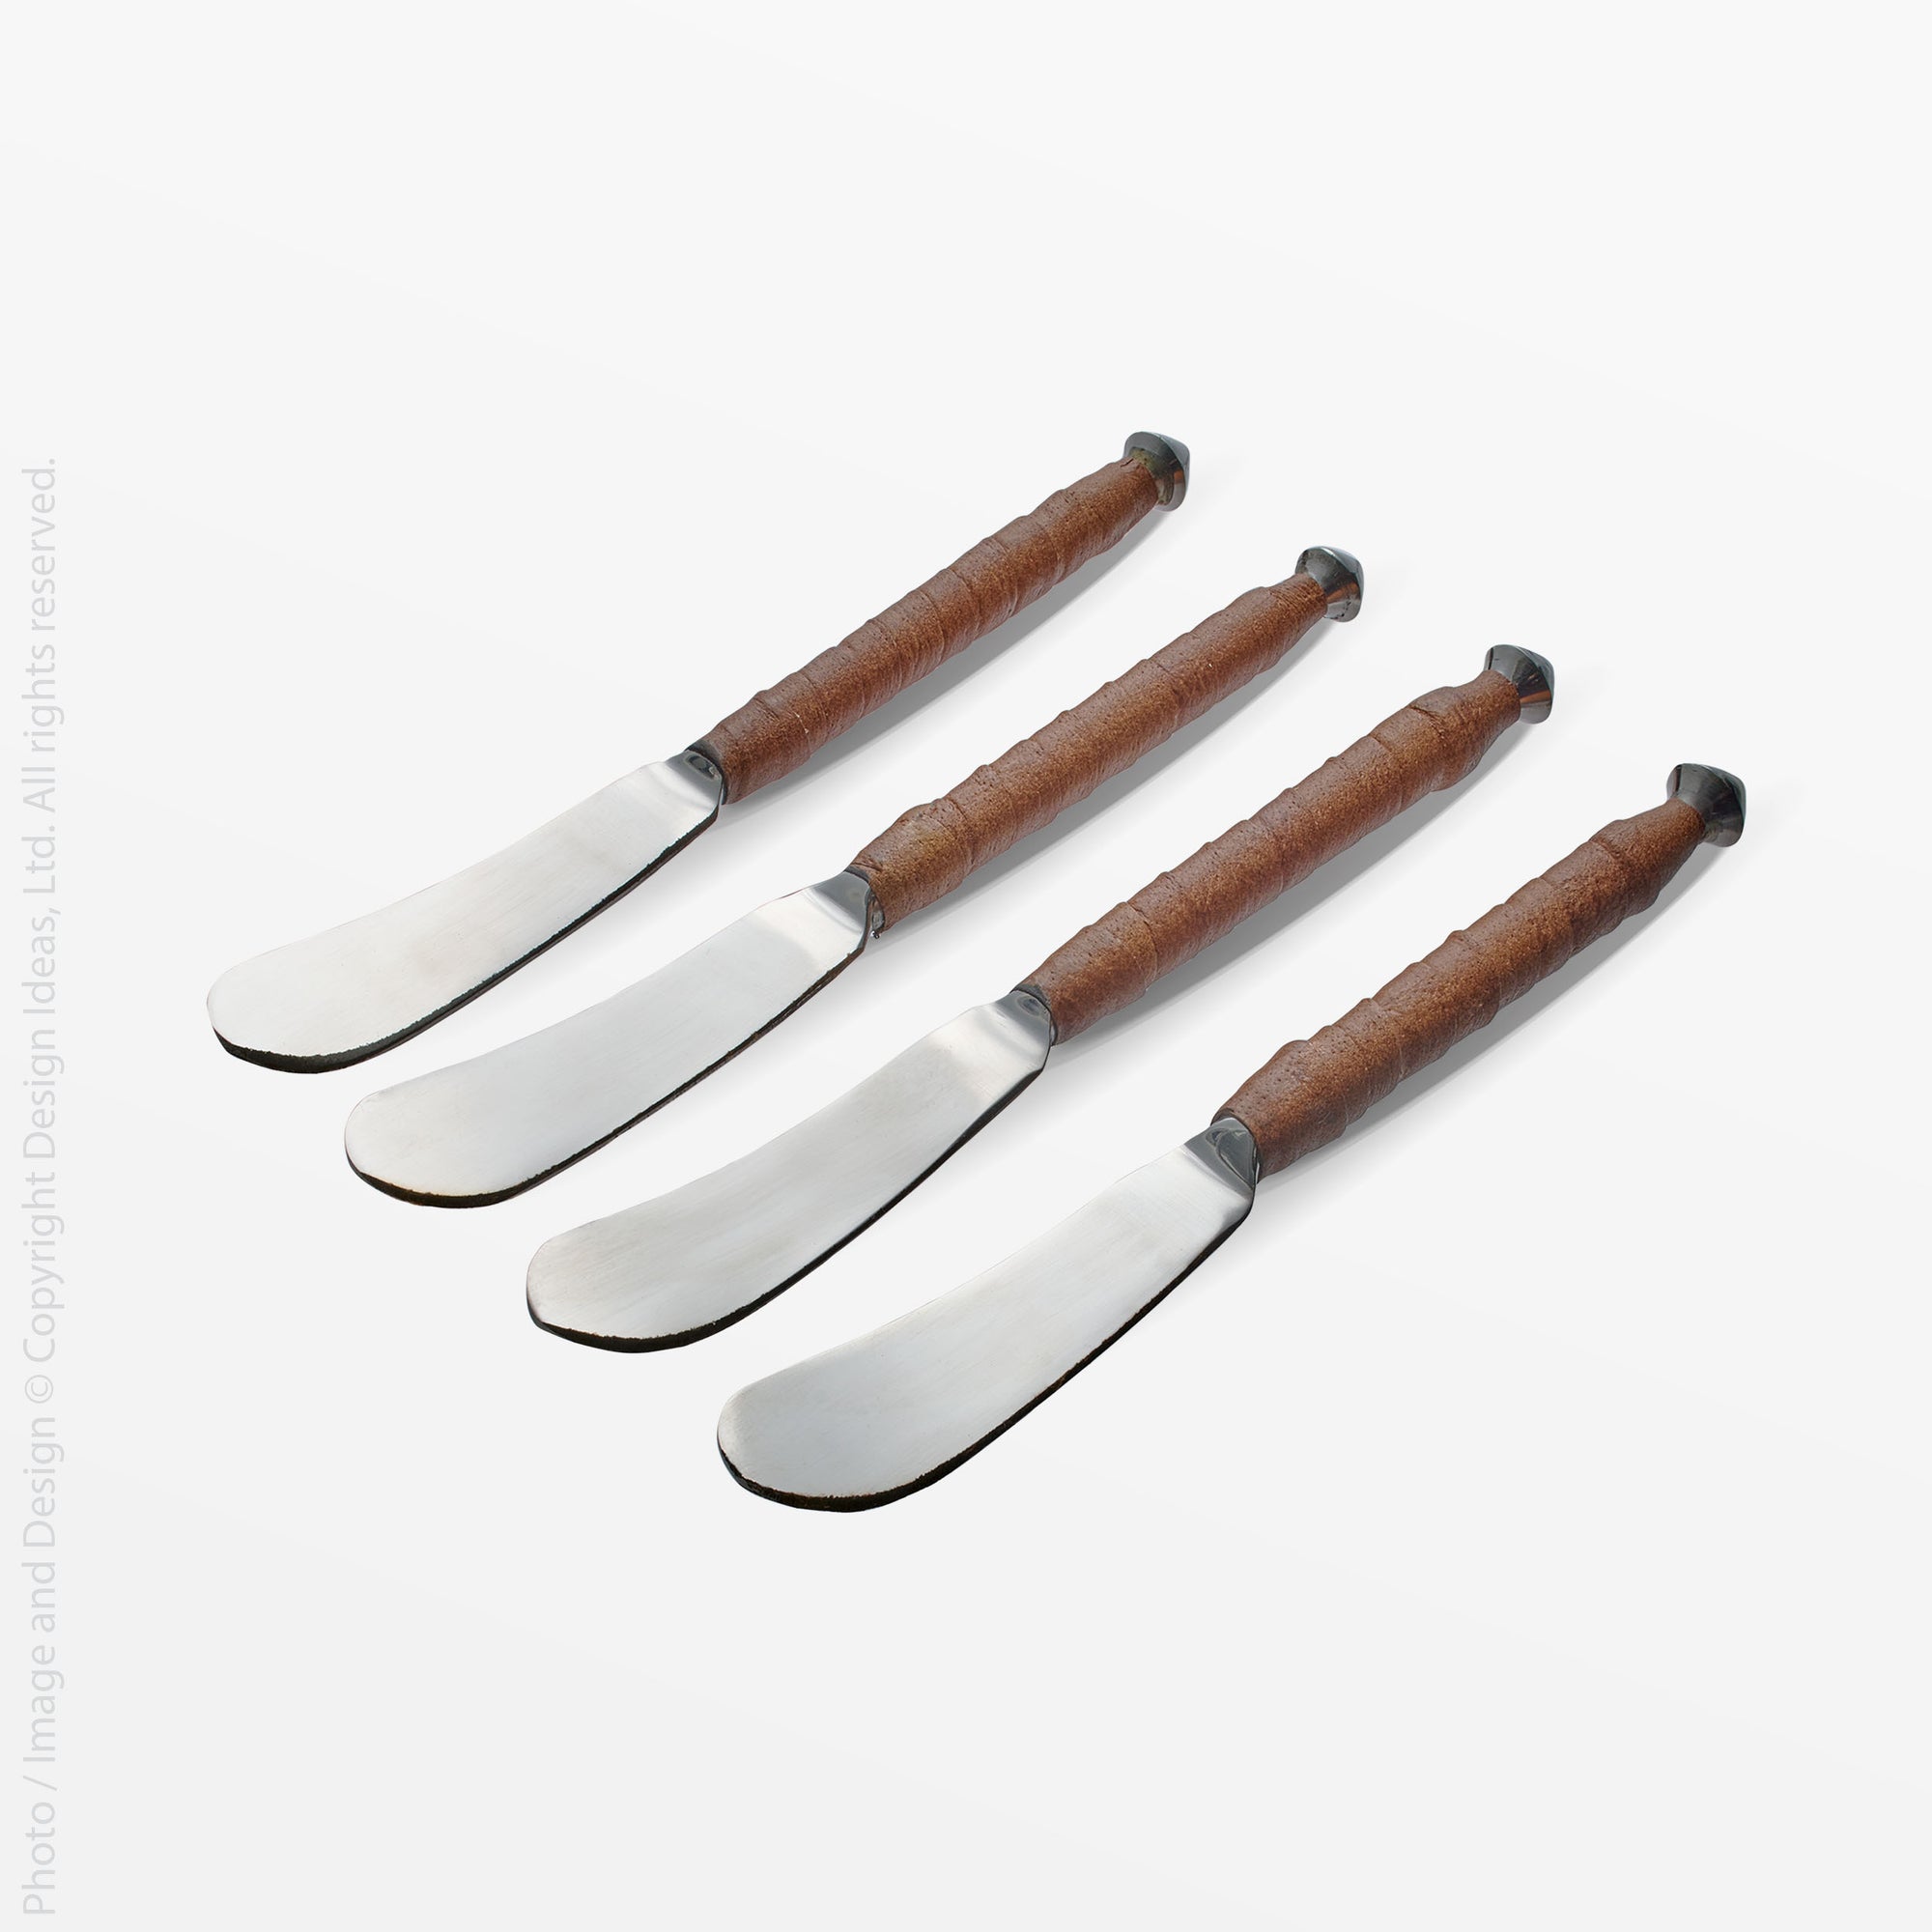 Bratzen™ Hand Forged Stainless Steel and Leather Spreaders (set of 4)